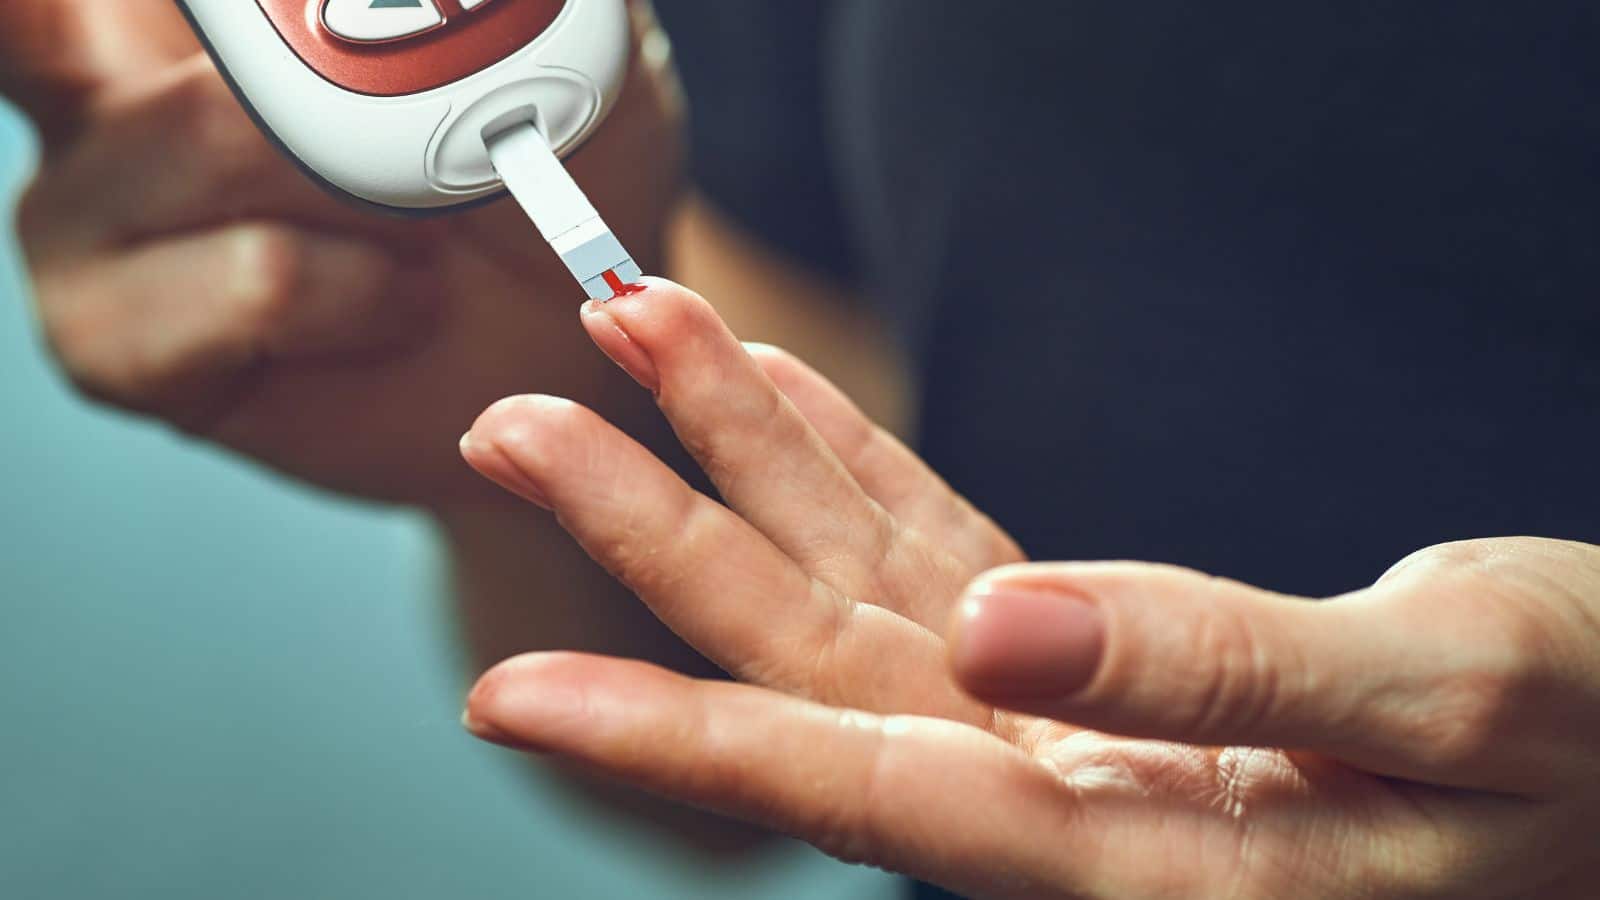 woman pricking her finger with a glucose monitoring device